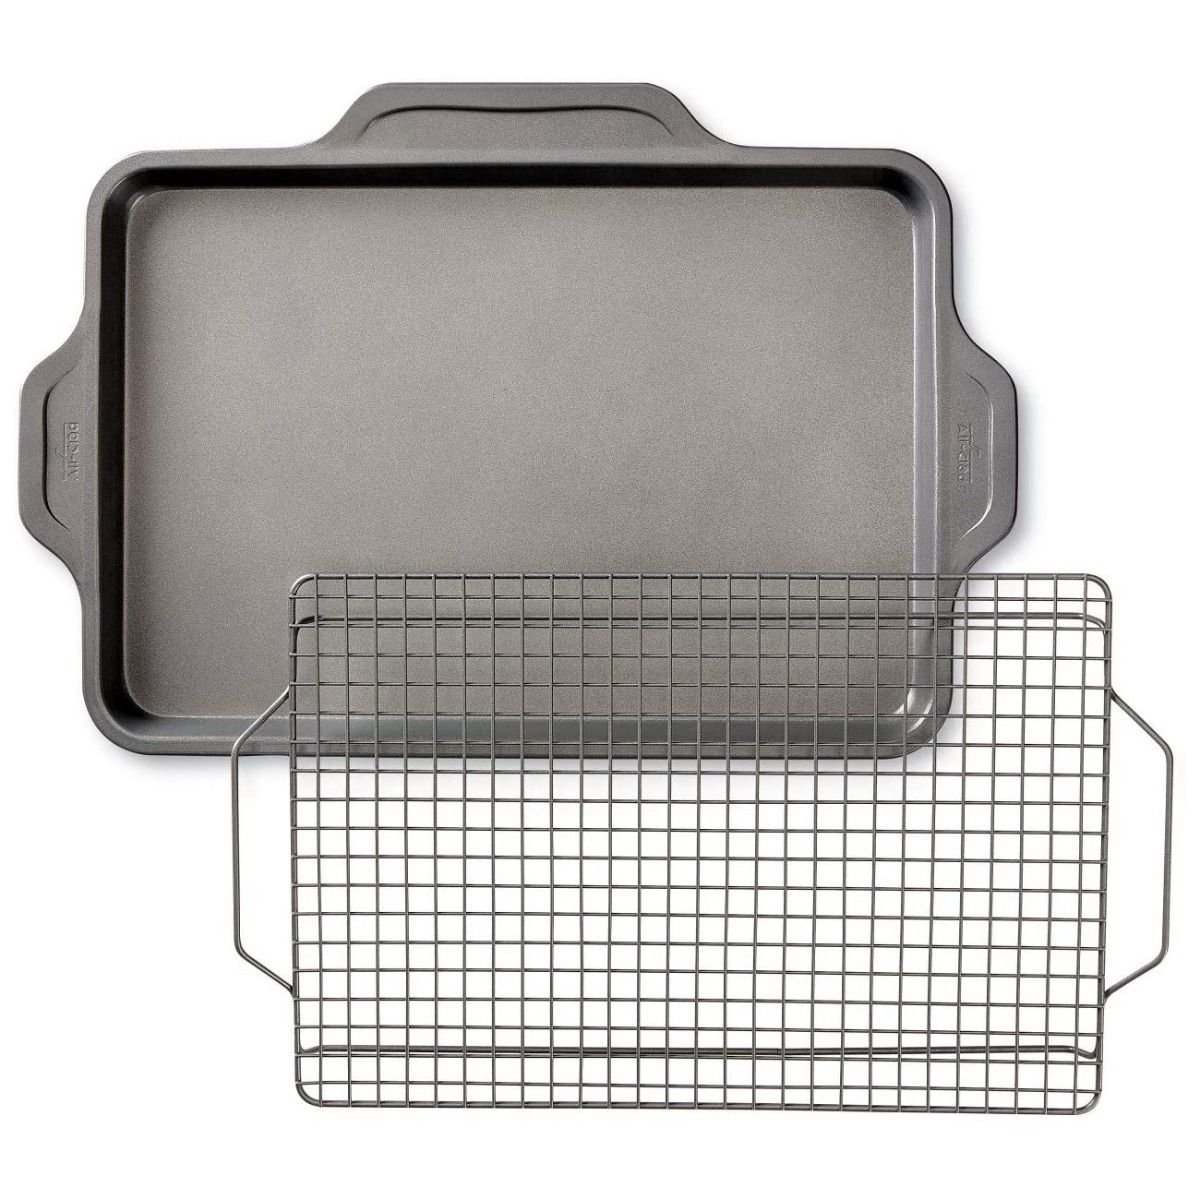 All-Clad Pro-Release 8 Square Baking Pan + Reviews